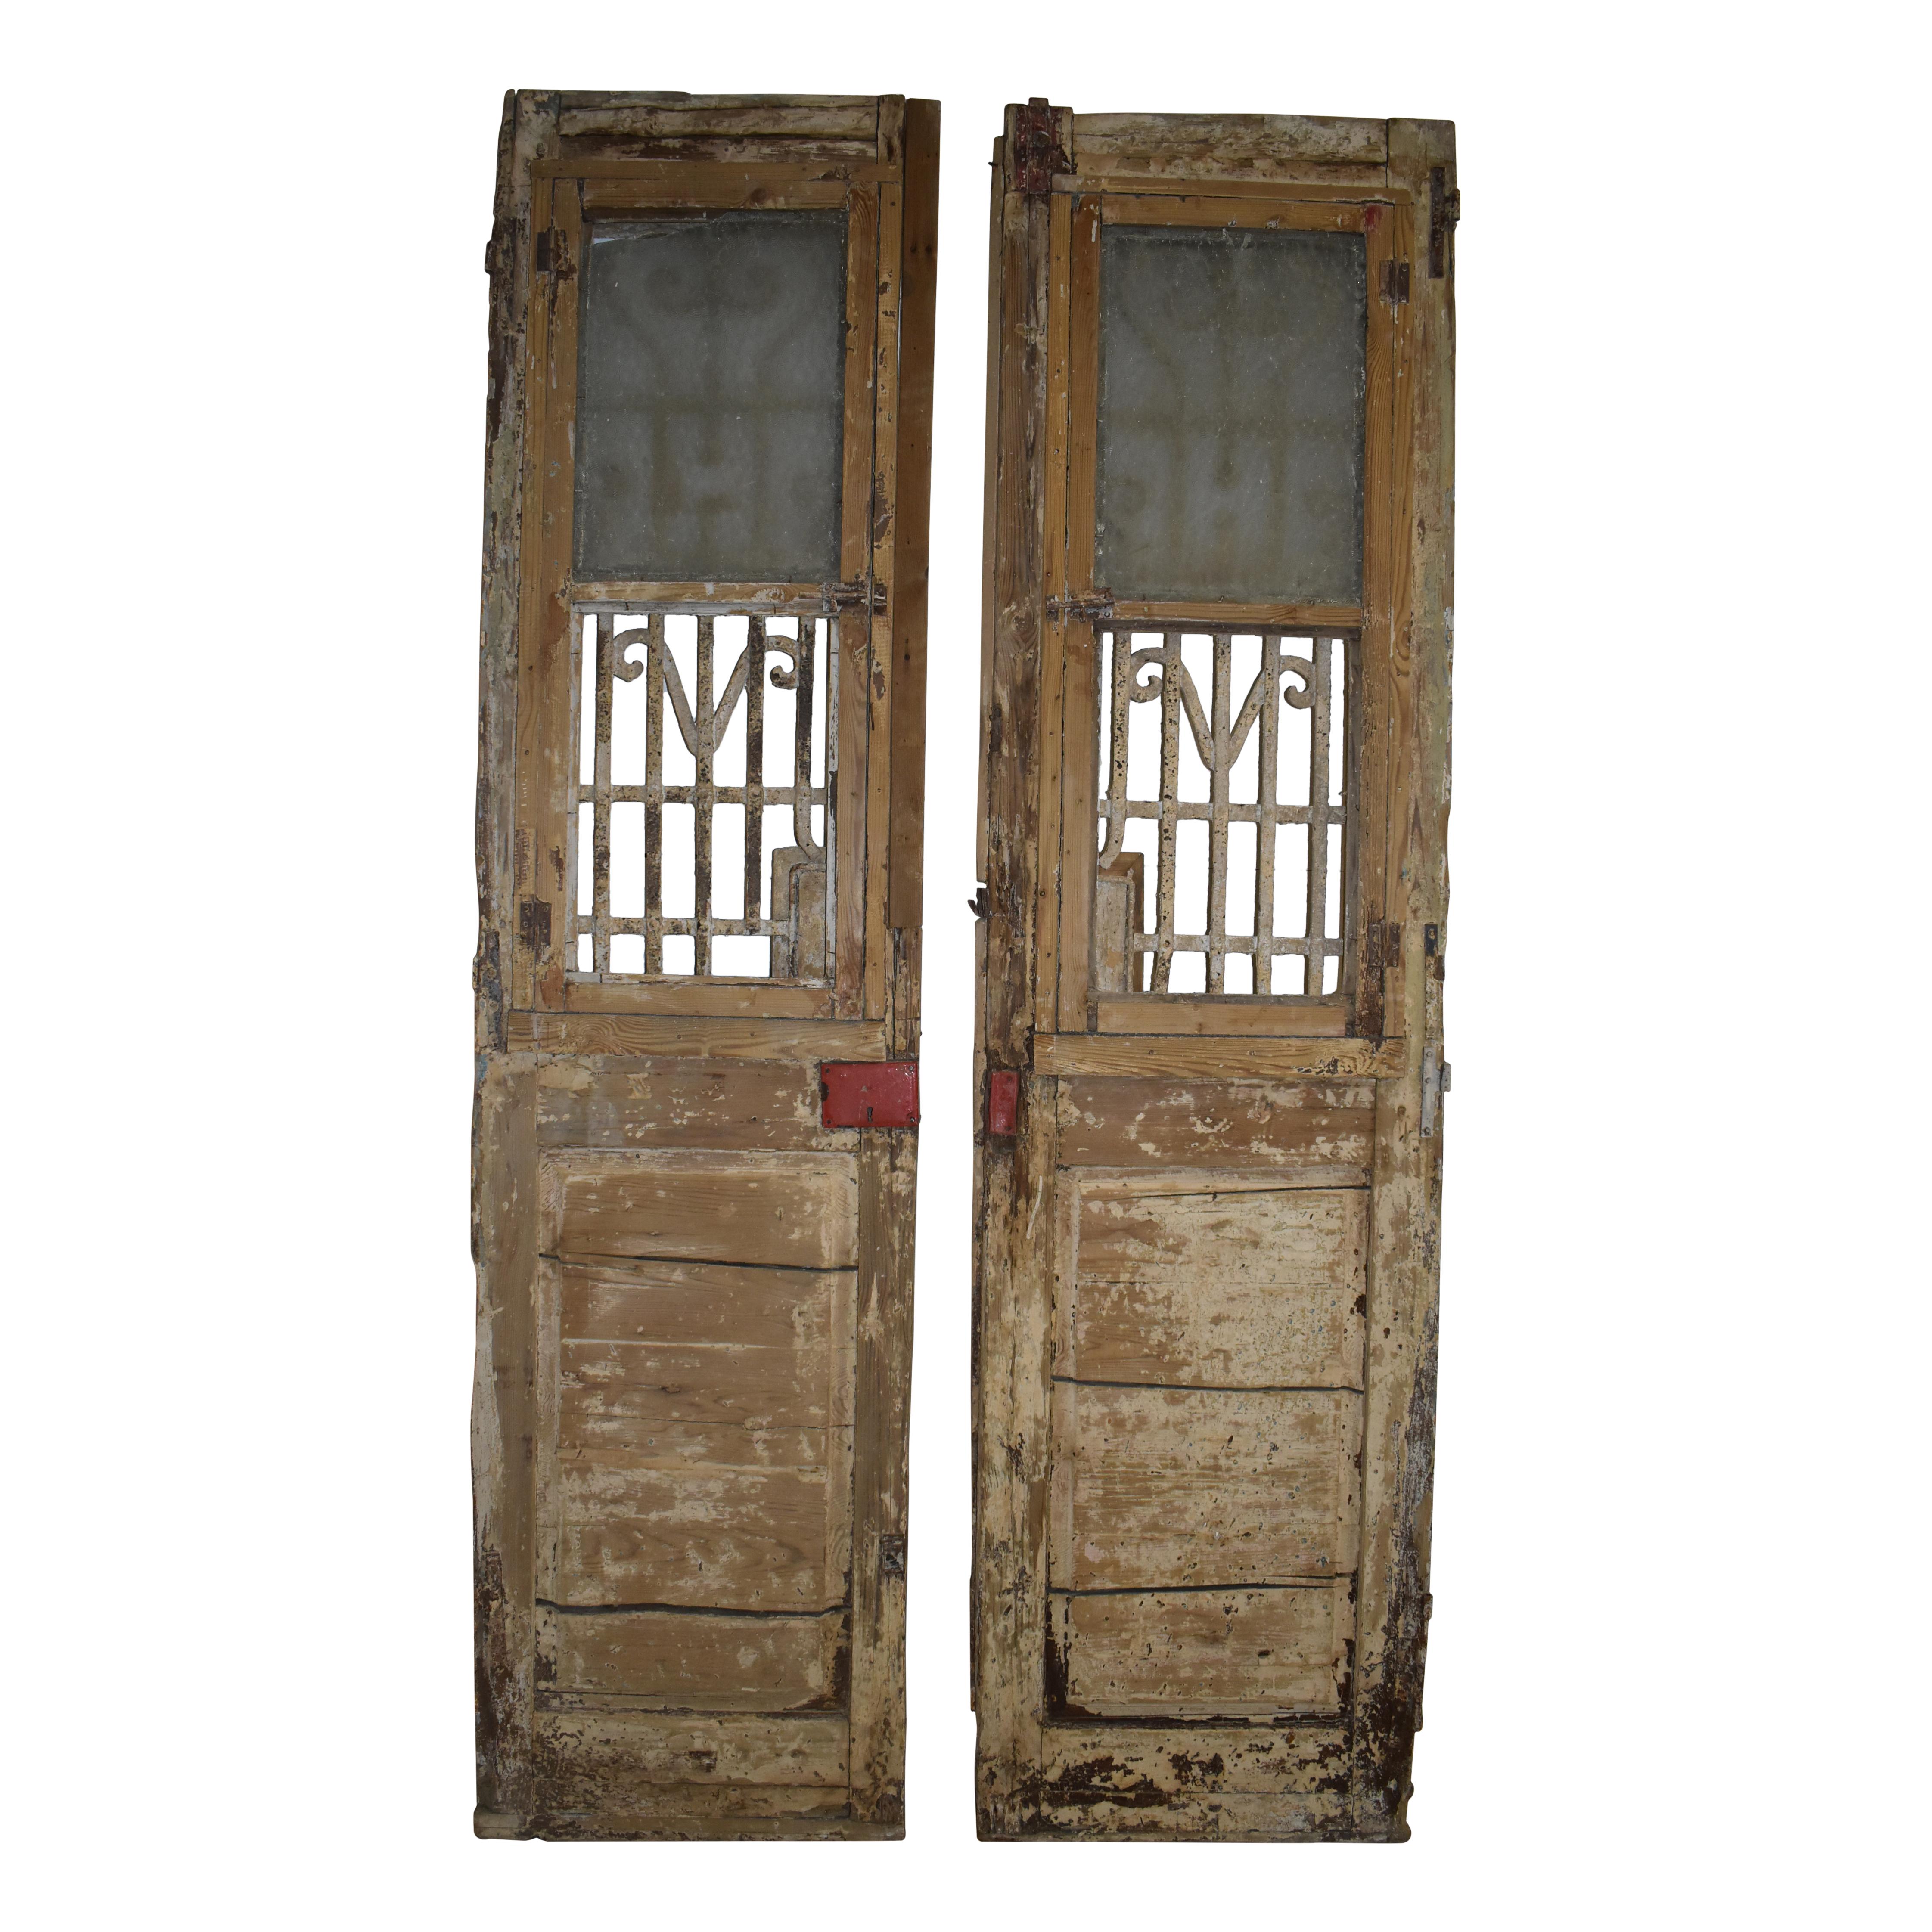 Made of Eastern European pine as is often the case in Egyptian doors, this beautiful set features raised panels on the lower half of each door with large window frames on the upper halves, enclosing decorative iron work. Most of the iron is riveted